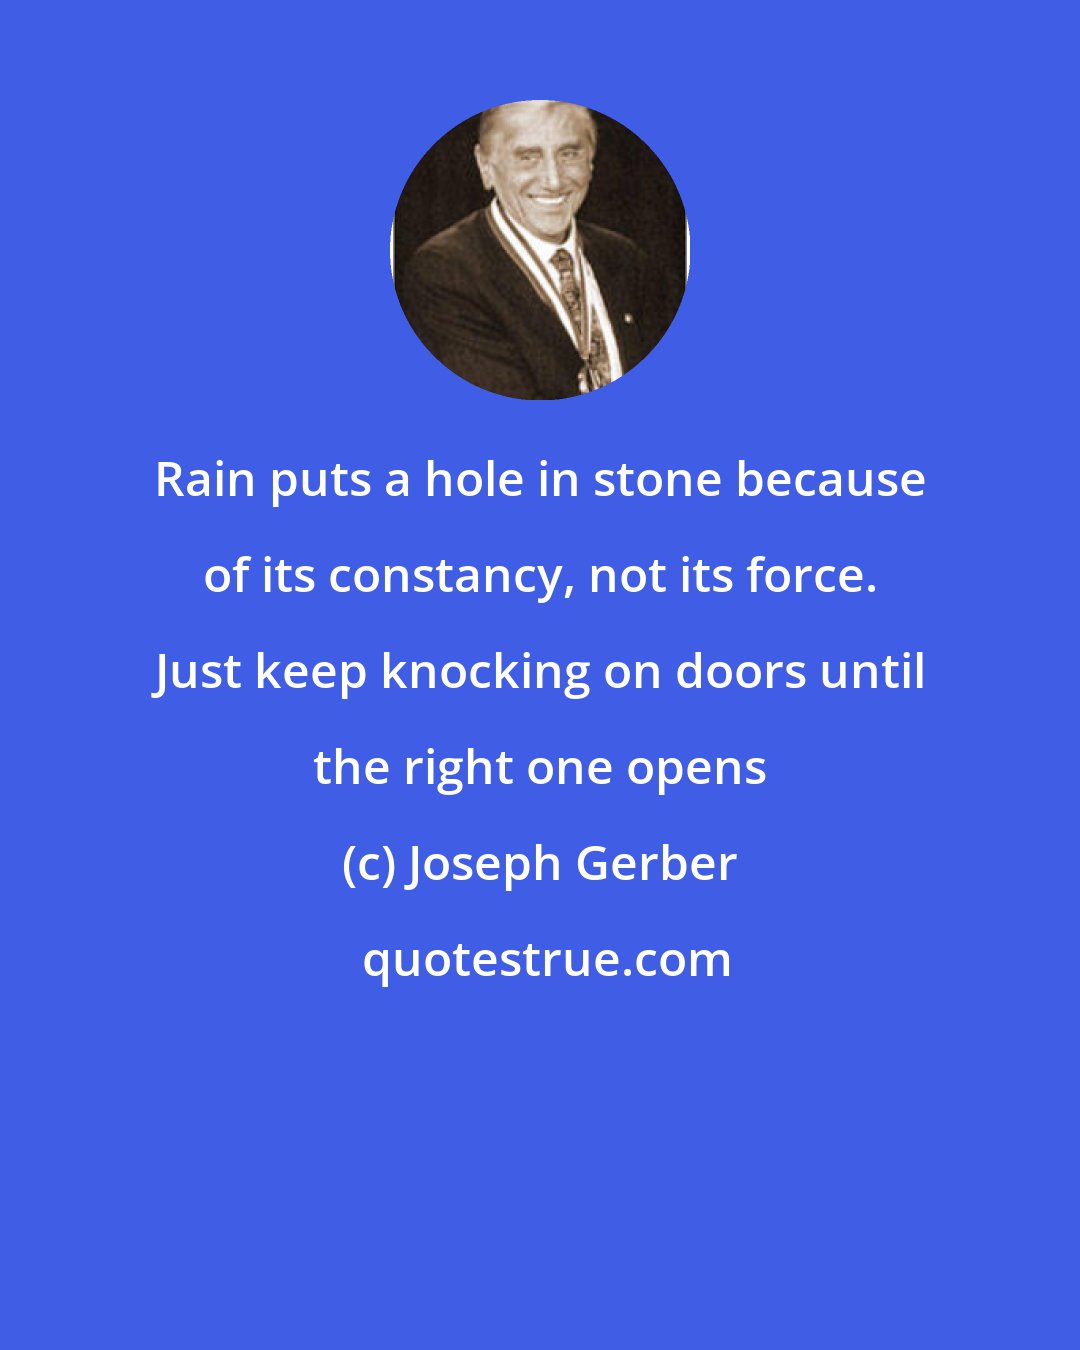 Joseph Gerber: Rain puts a hole in stone because of its constancy, not its force. Just keep knocking on doors until the right one opens